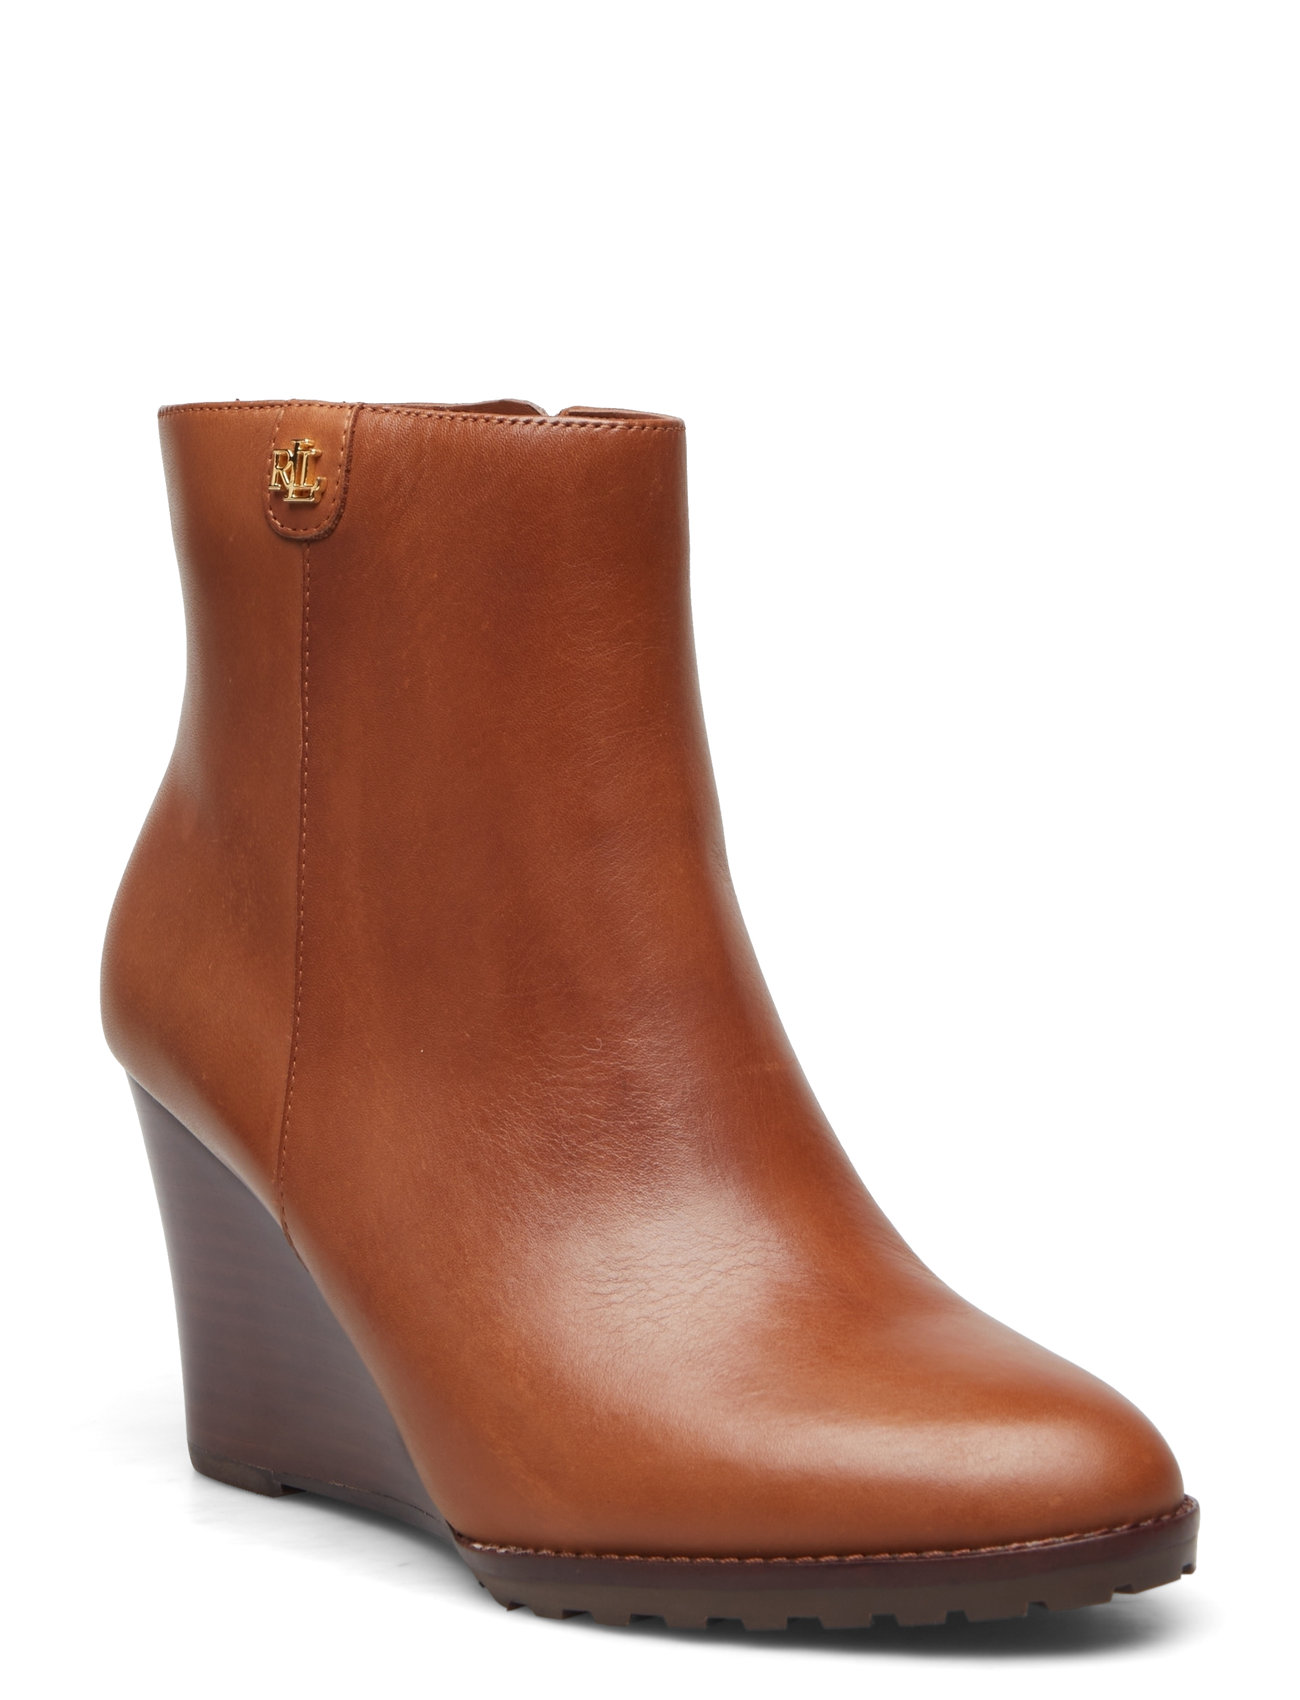 Shaley Calfskin Wedge Bootie Shoes Boots Ankle Boots Ankle Boots With Heel Brown Lauren Ralph Lauren